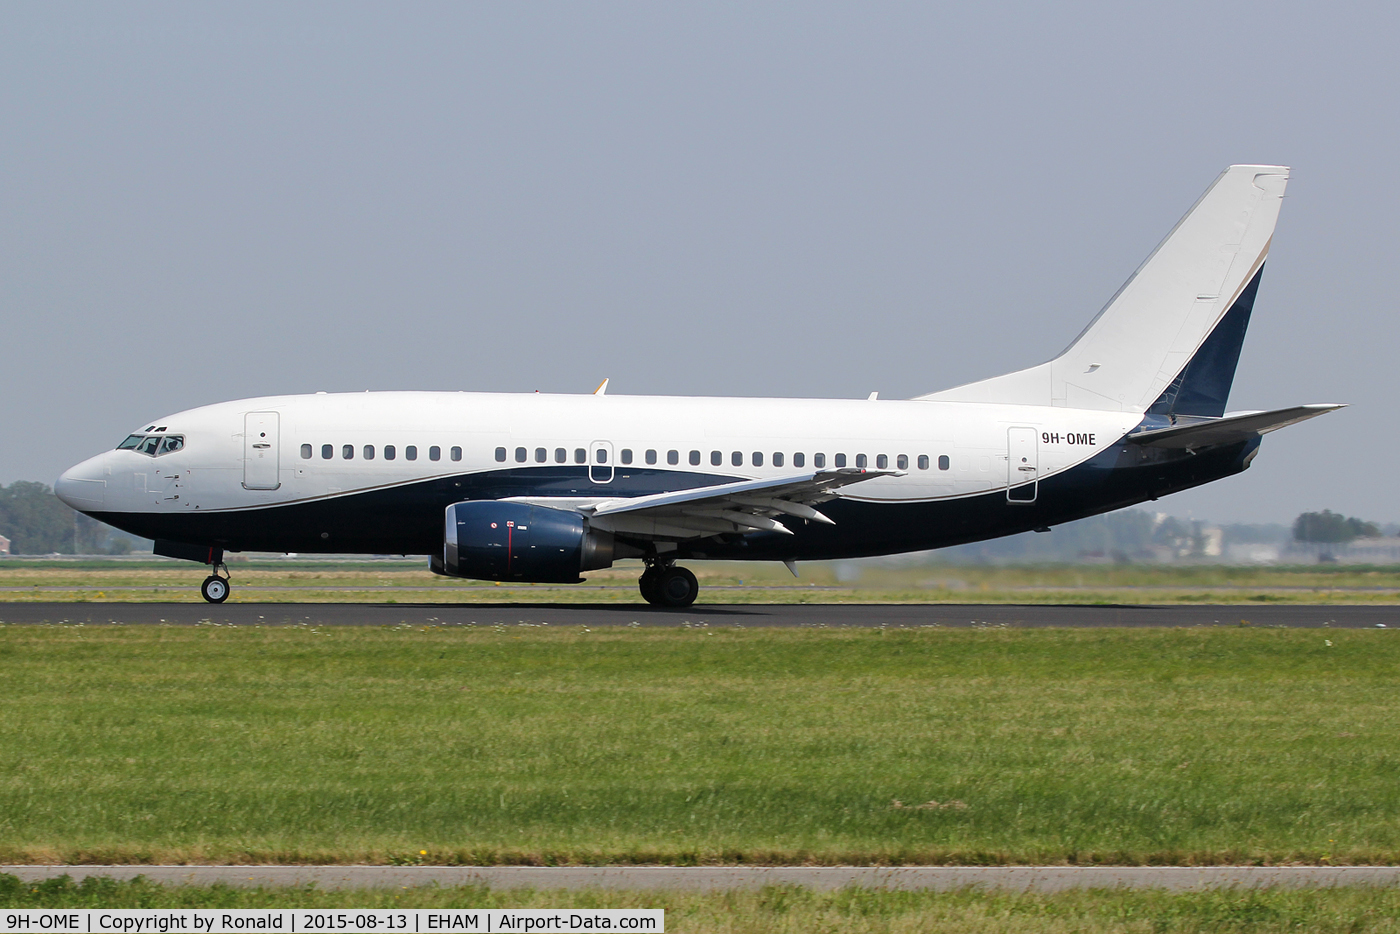 9H-OME, 1991 Boeing 737-505 C/N 24274, at spl